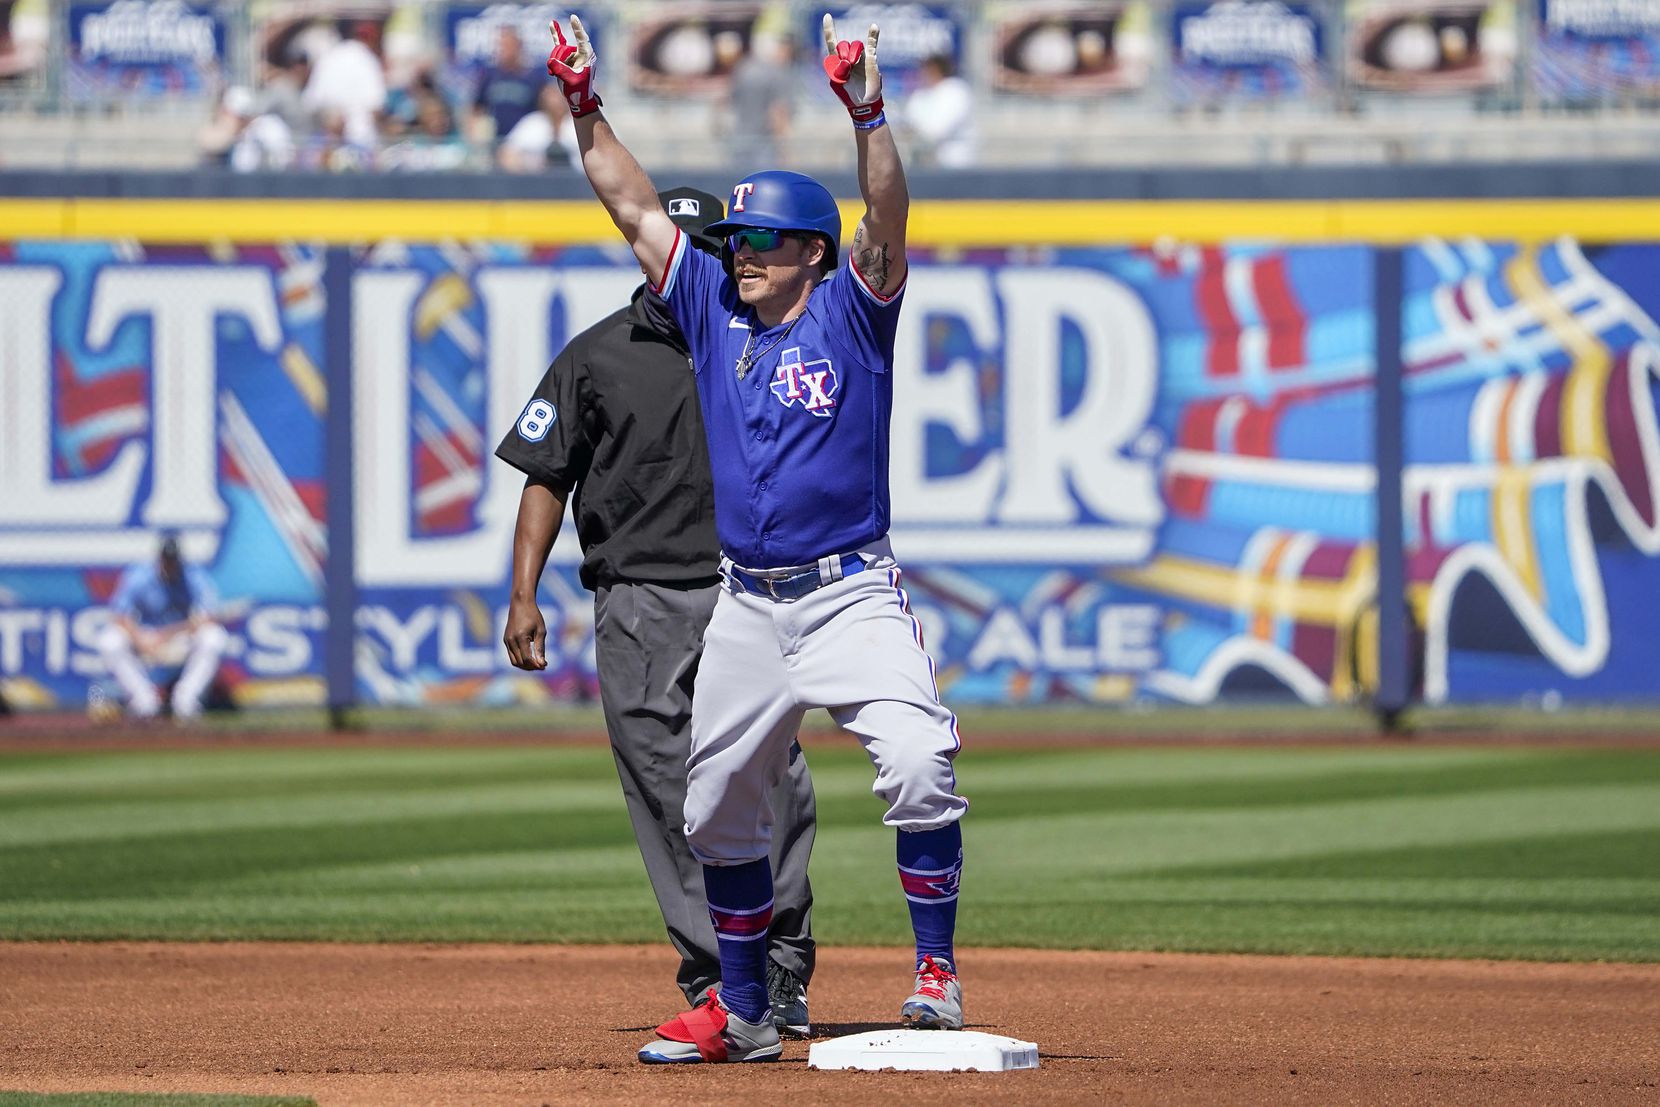 Texas Rangers infielder Brock Holt celebrates at second base after hitting a leadoff double during the first inning of a spring training game against the Seattle Mariners at Peoria Sports Complex on Wednesday, March 10, 2021, in Peoria, Ariz.